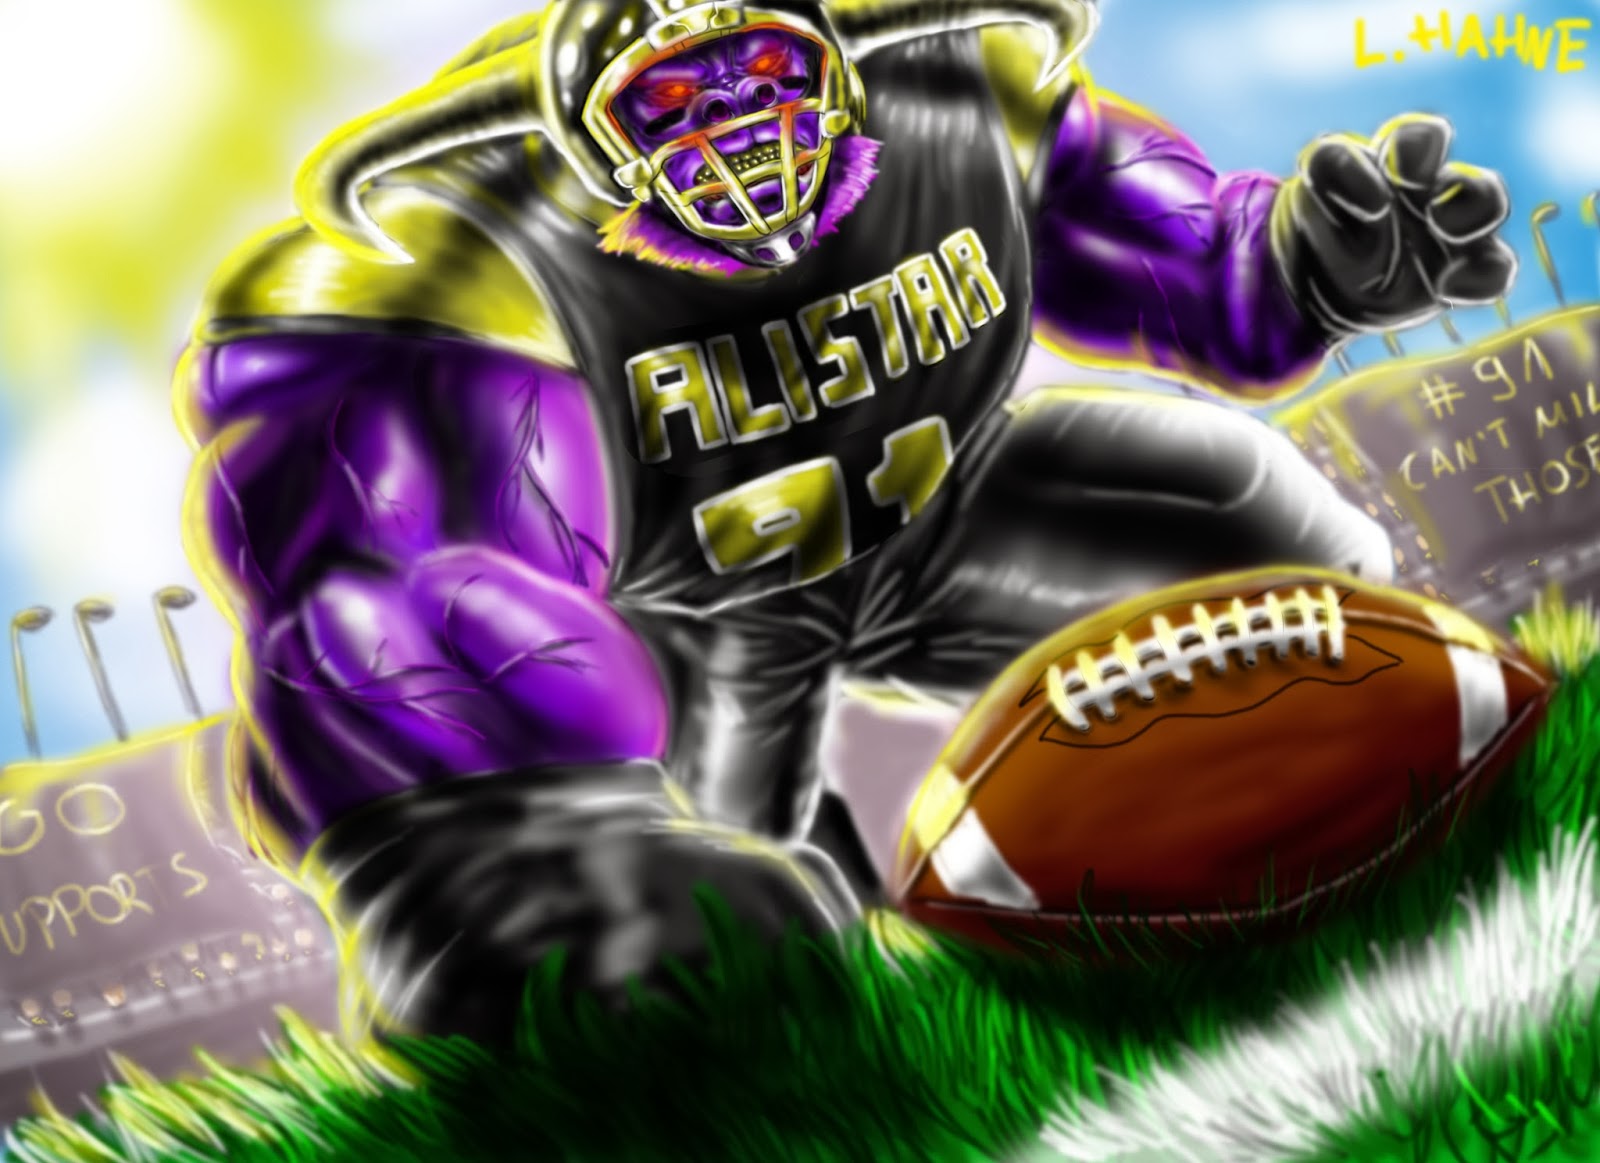 alistar wallpaper,american football,super bowl,fictional character,easter egg,competition event